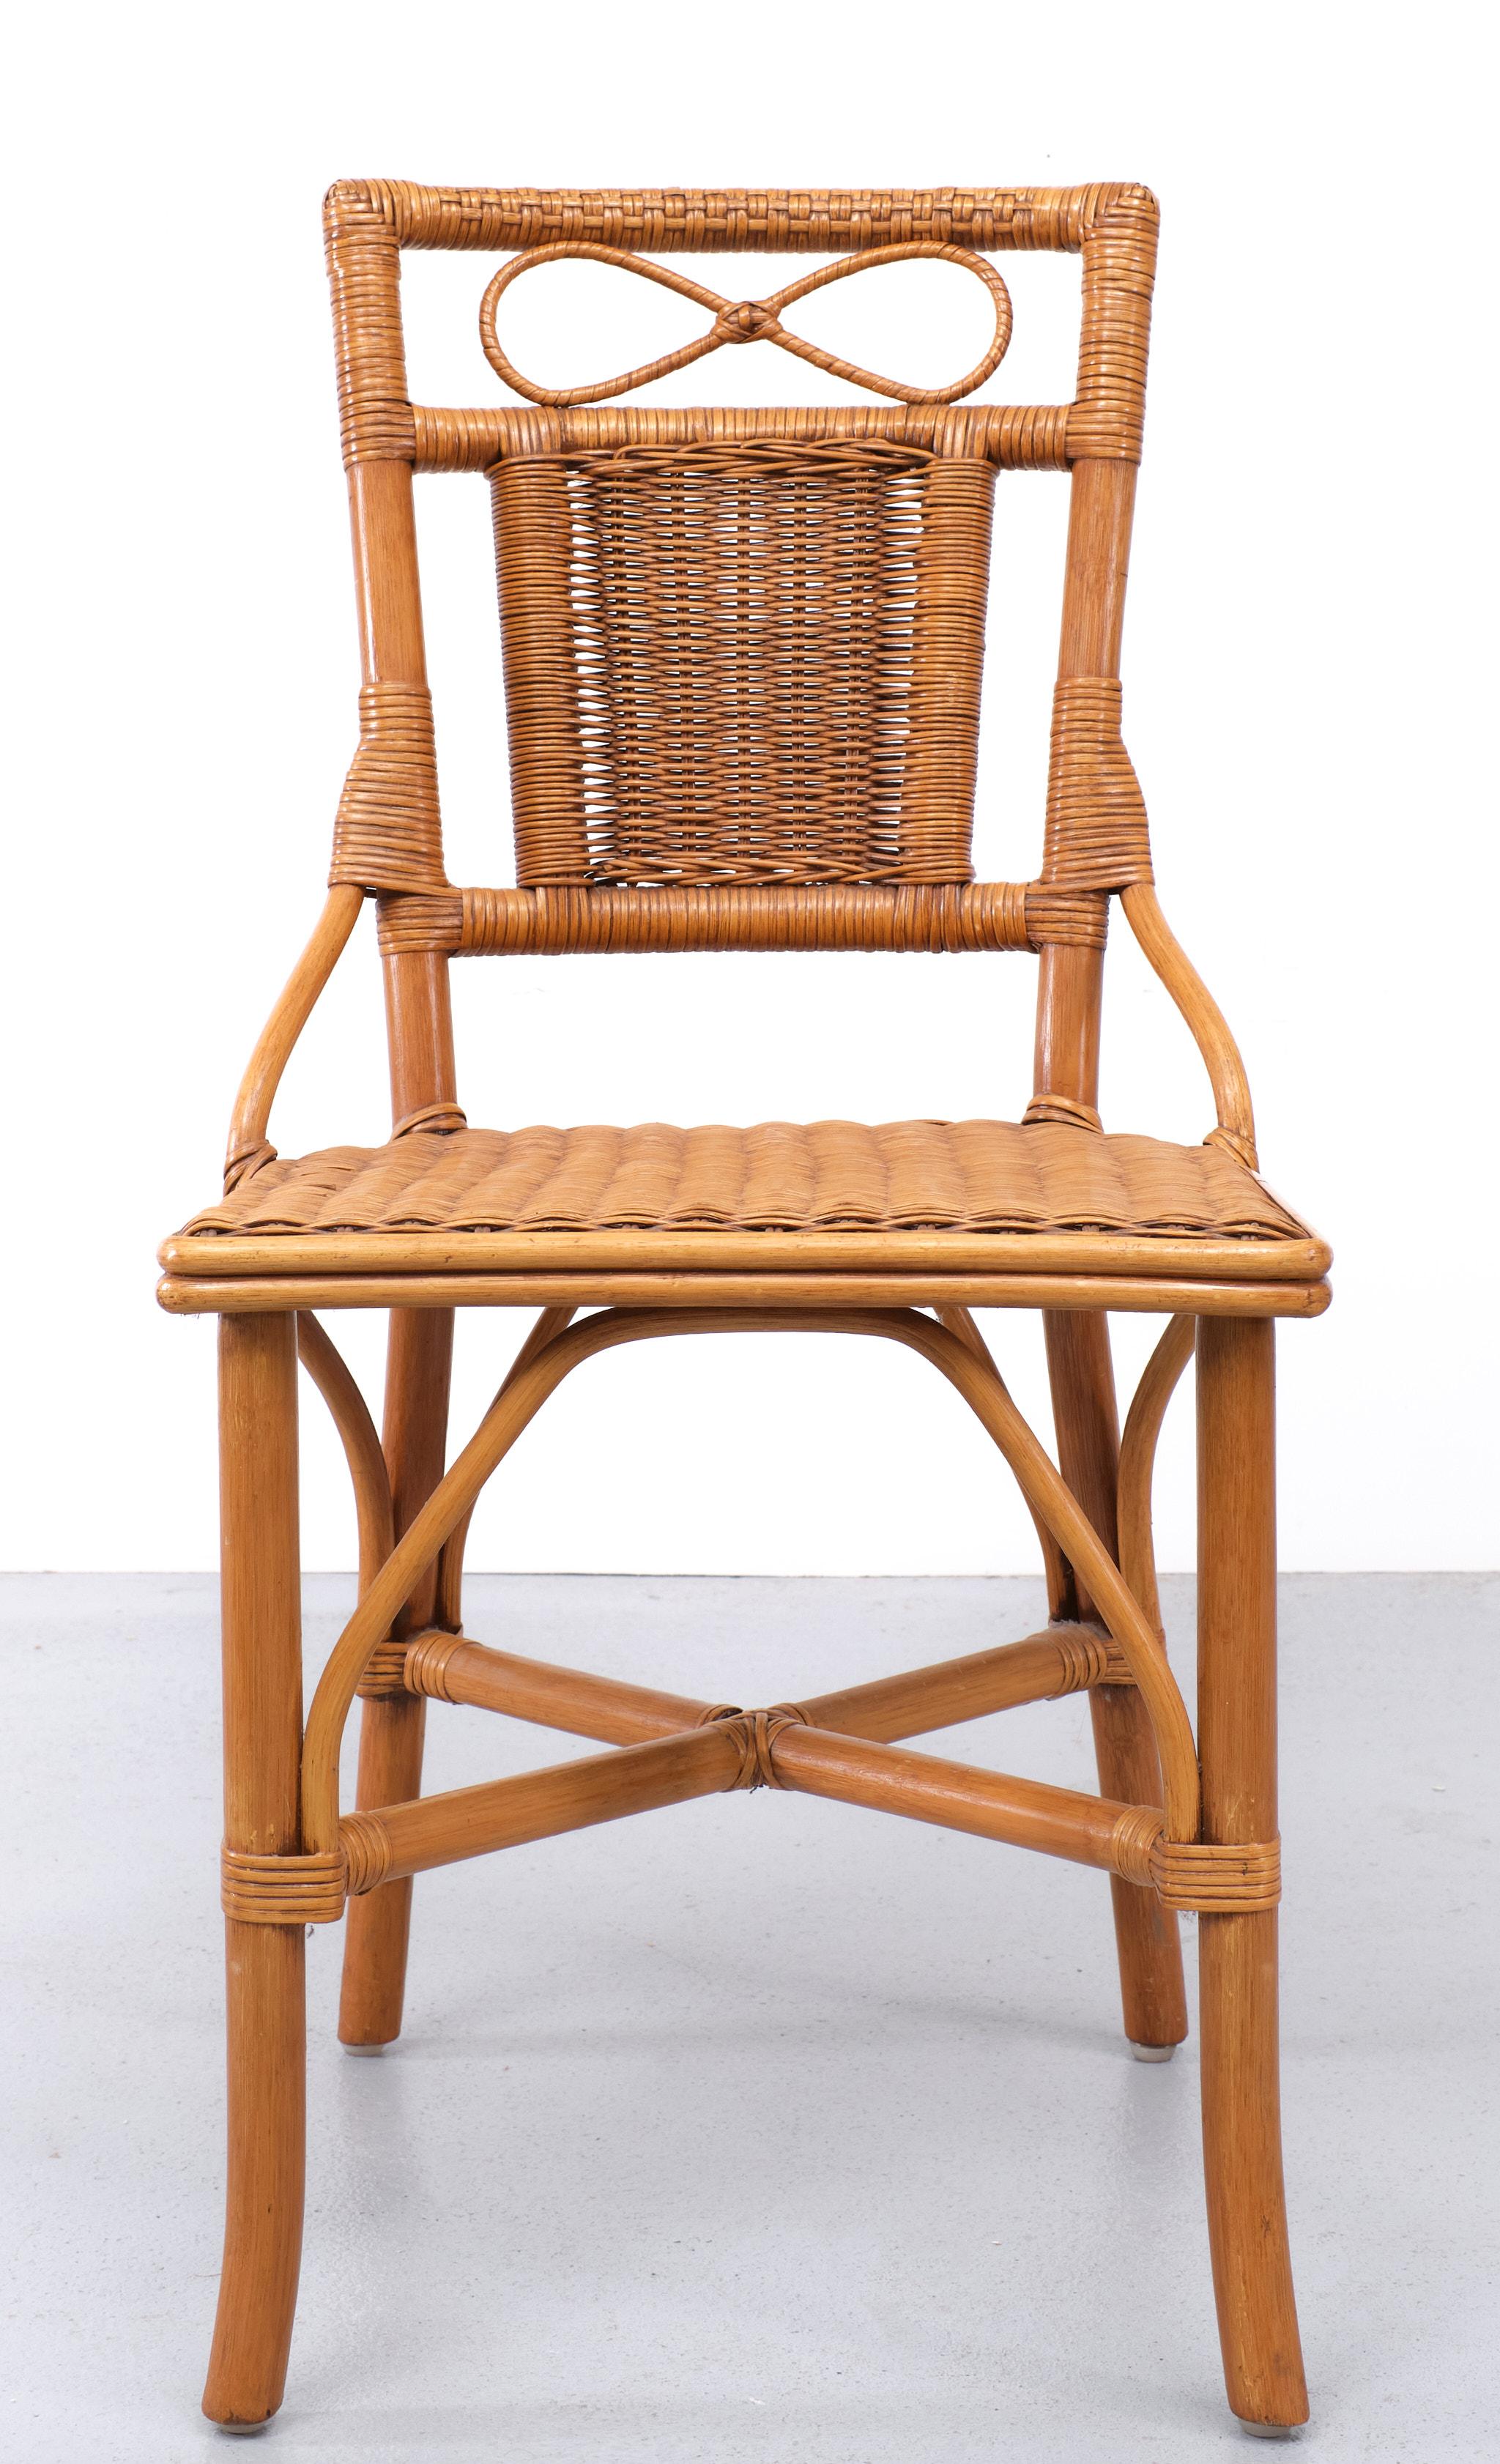 Bohemian Wicker Desk and Chair 1970s France  For Sale 3